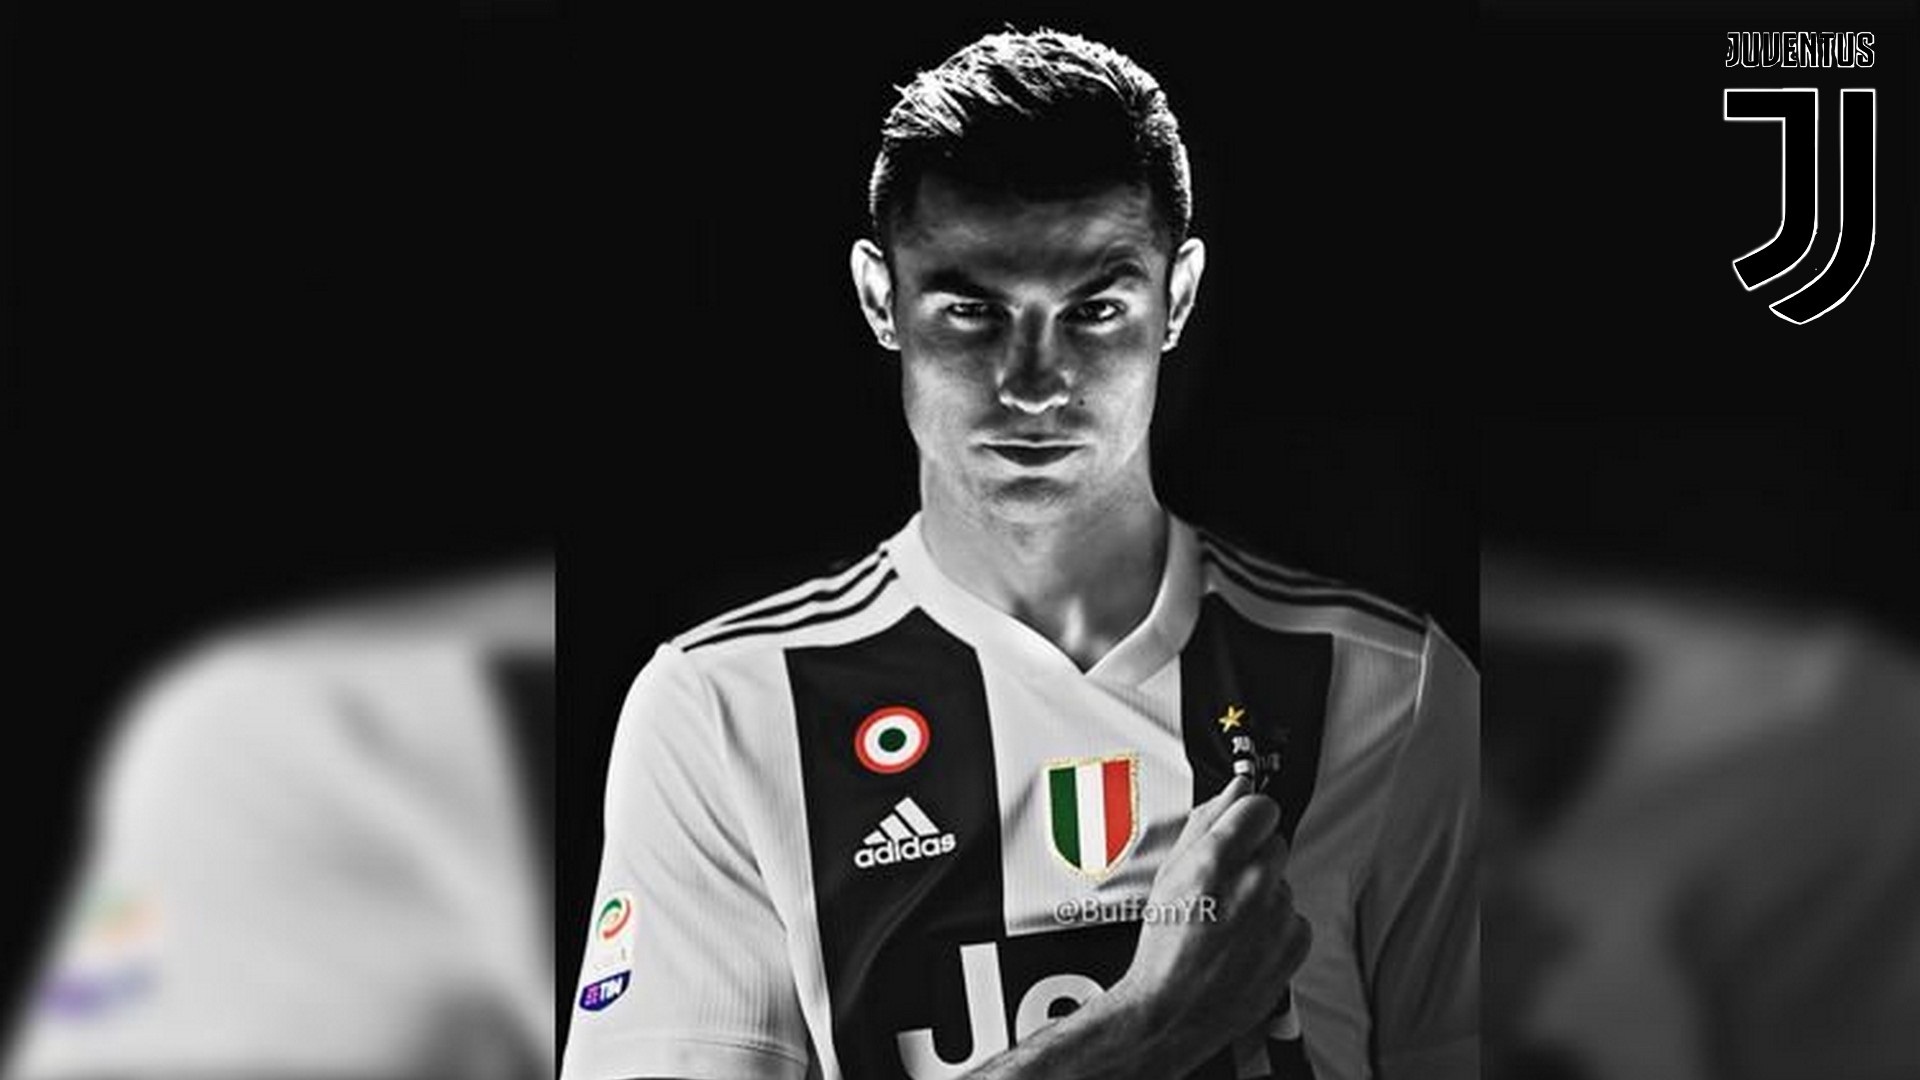 Wallpaper Desktop Christiano Ronaldo Juventus HD With Resolution 1920X1080 pixel. You can make this wallpaper for your Mac or Windows Desktop Background, iPhone, Android or Tablet and another Smartphone device for free